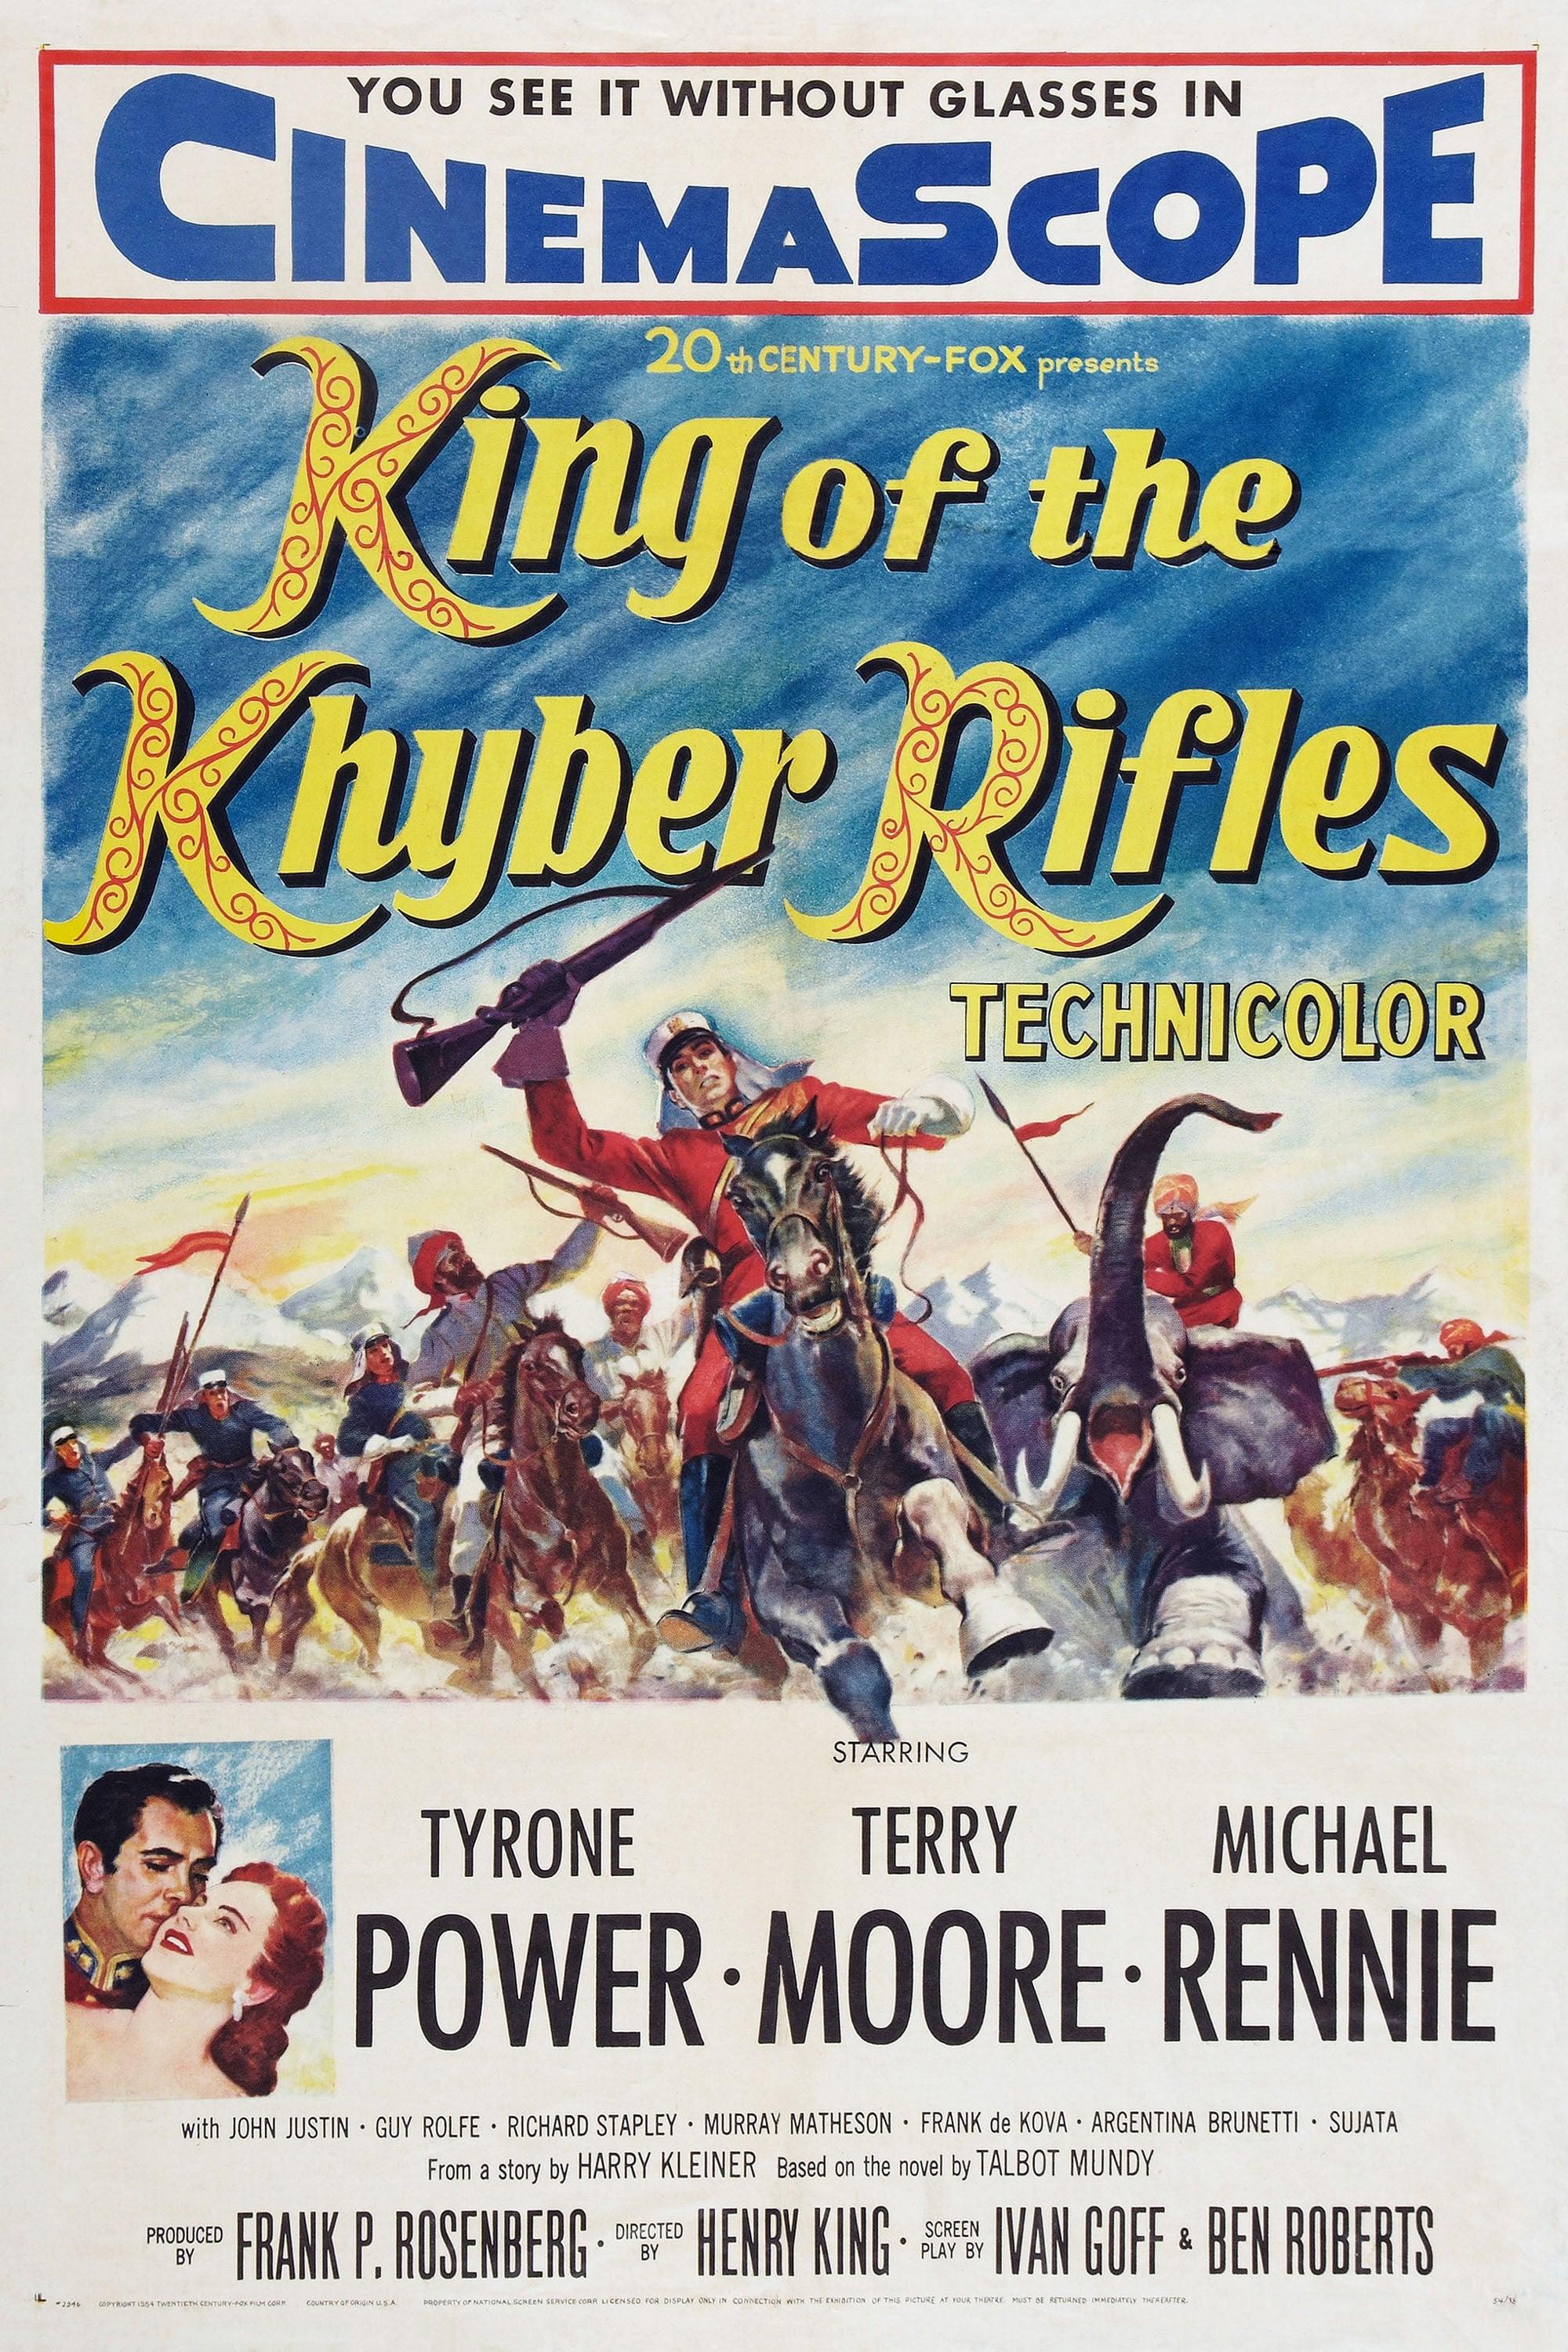 King of the Khyber Rifles poster